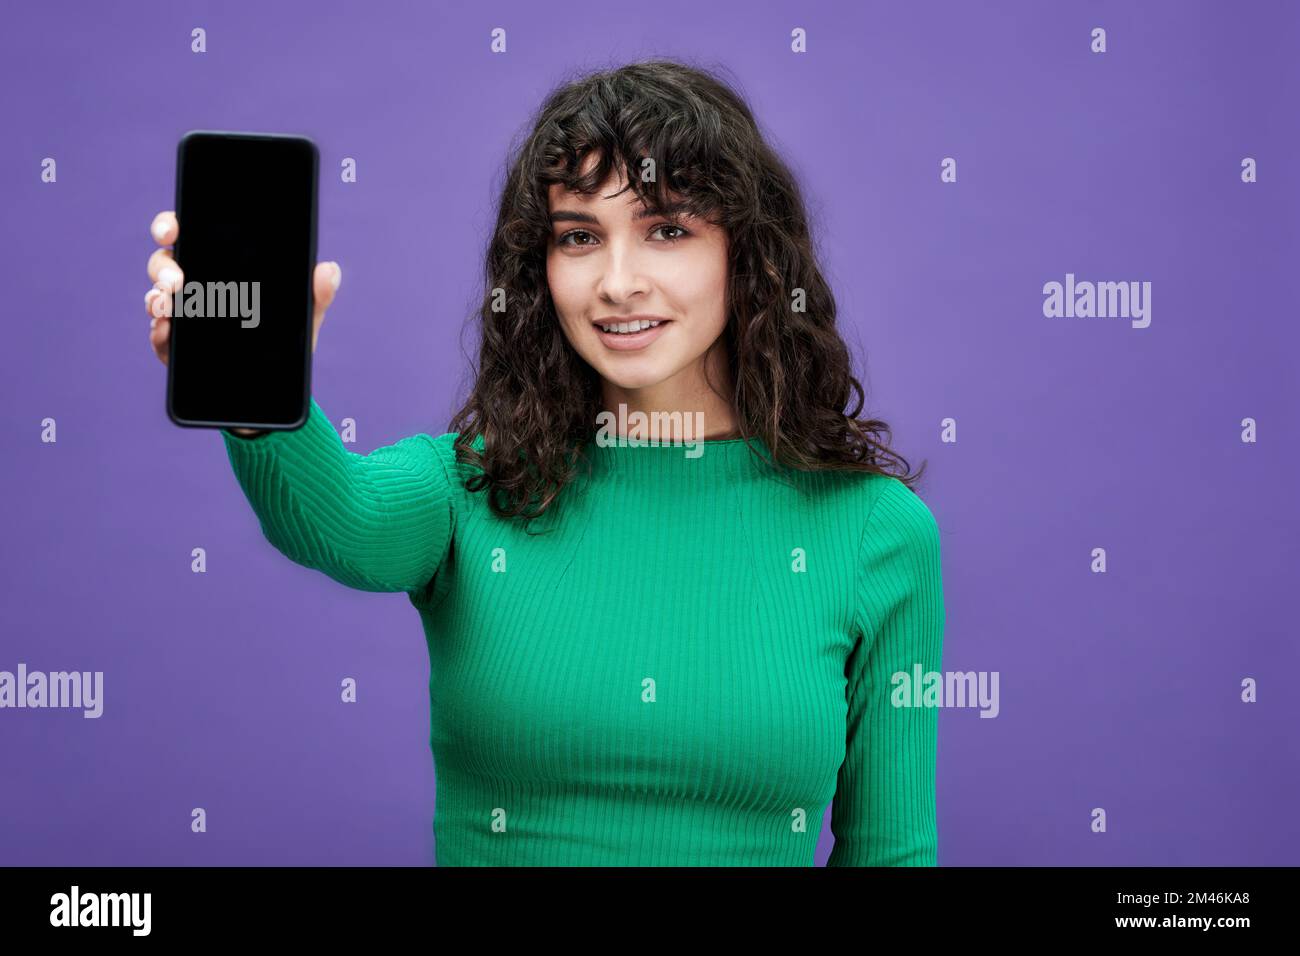 Brunette girl in green pullover with long sleeves holding smartphone while making presentation of sale announcement on violet background Stock Photo